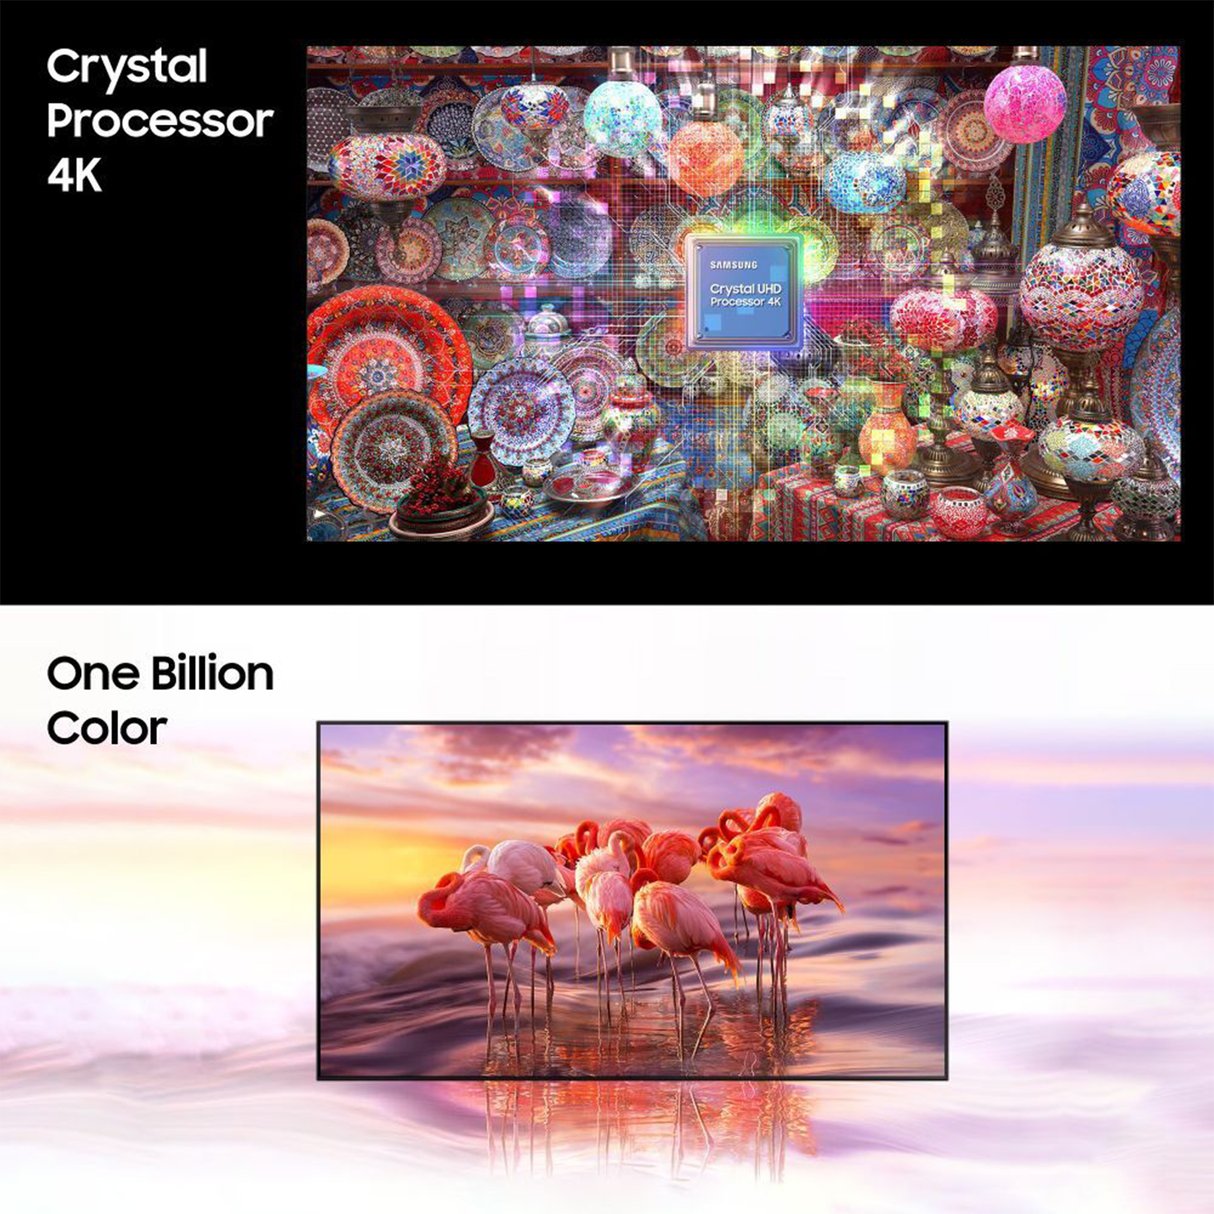 65CU7700: Elevate your viewing experience with vibrant UHD visuals.